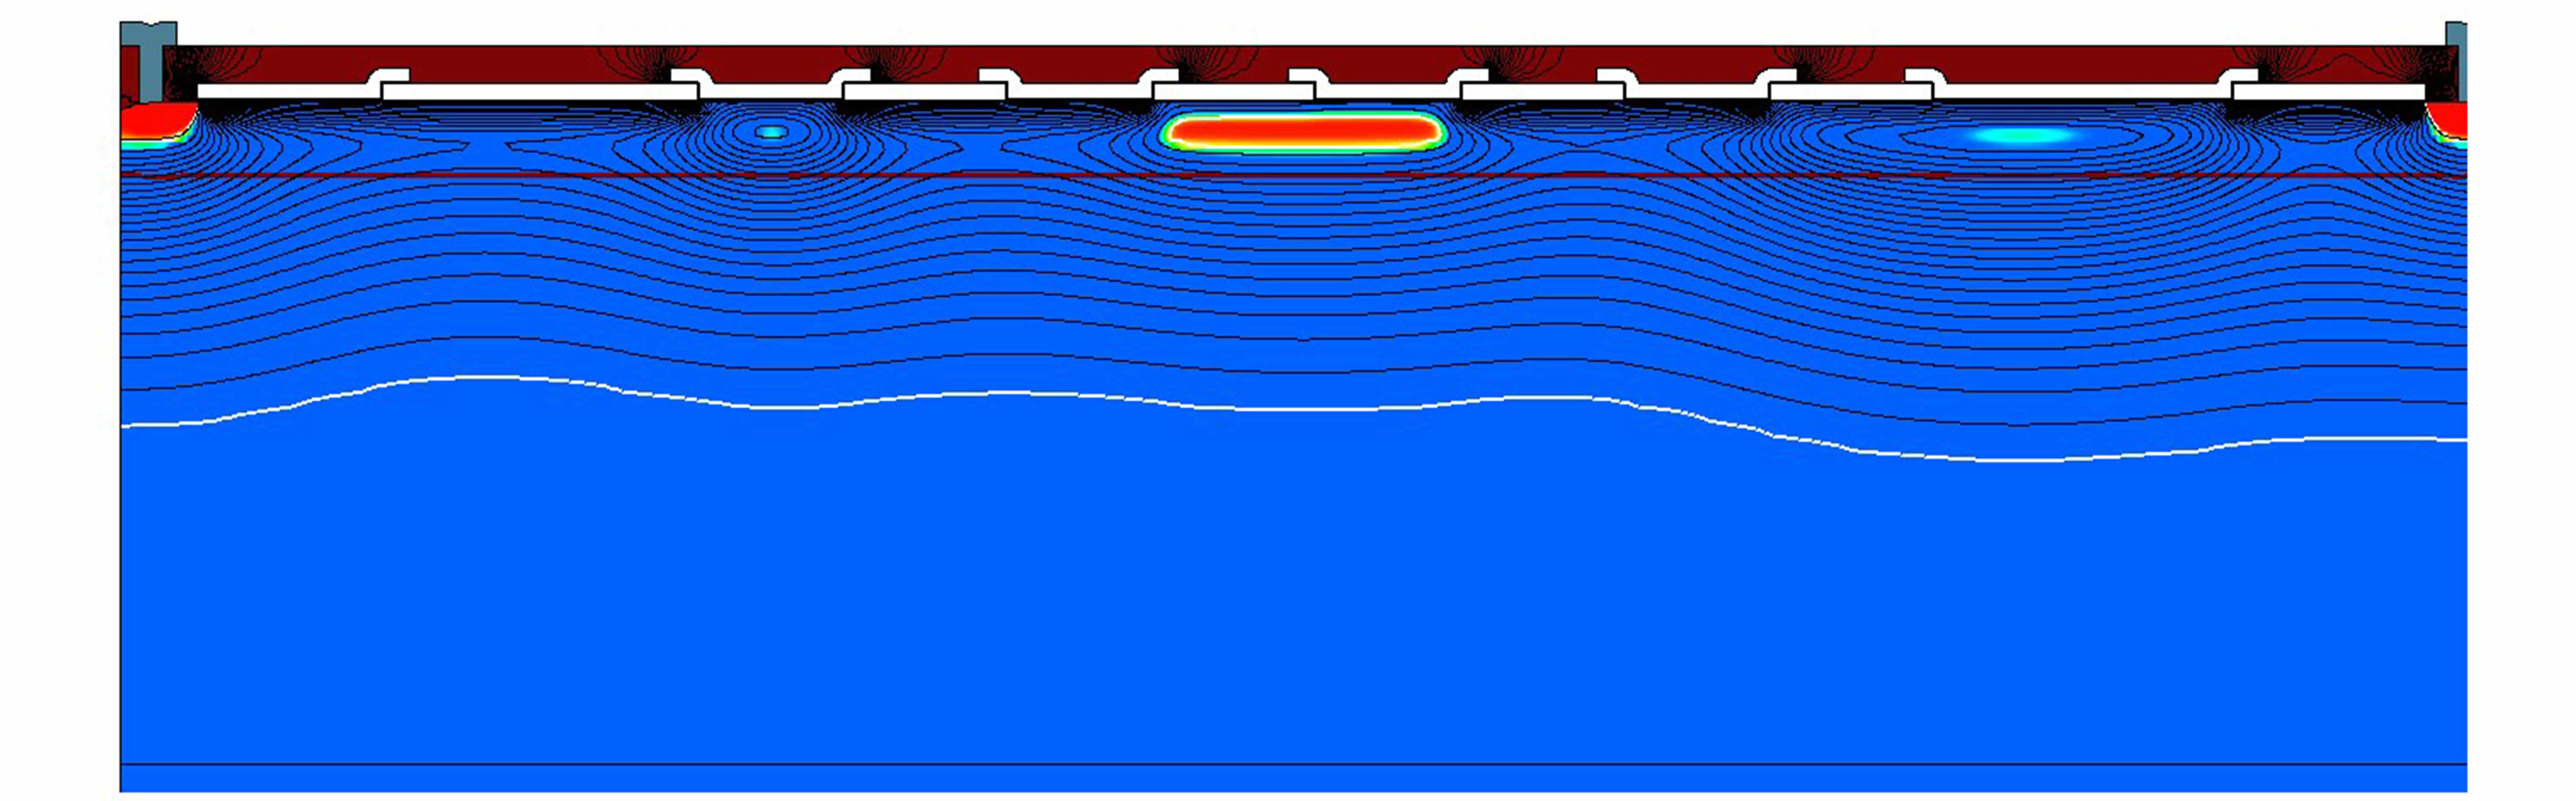 Simulation result of a customized CMOS CCD 